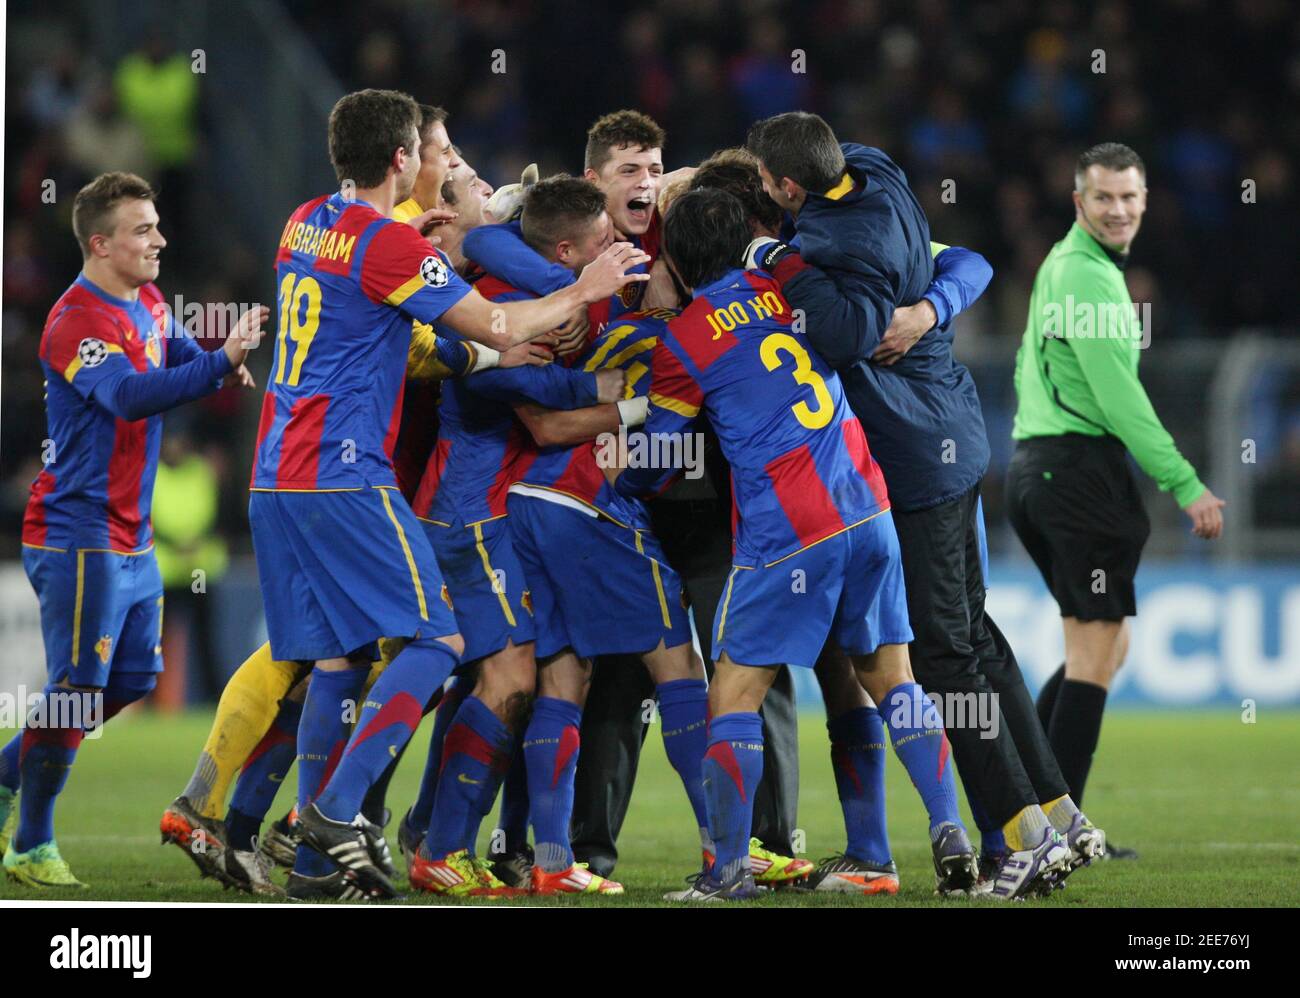 Football - FC Basel v Manchester United UEFA Champions League Group Stage  Matchday Six Group C - St.Jakob-Park, Basel, Switzerland - 7/12/11 FC Basel  celebrate at the end Mandatory Credit: Action Images /